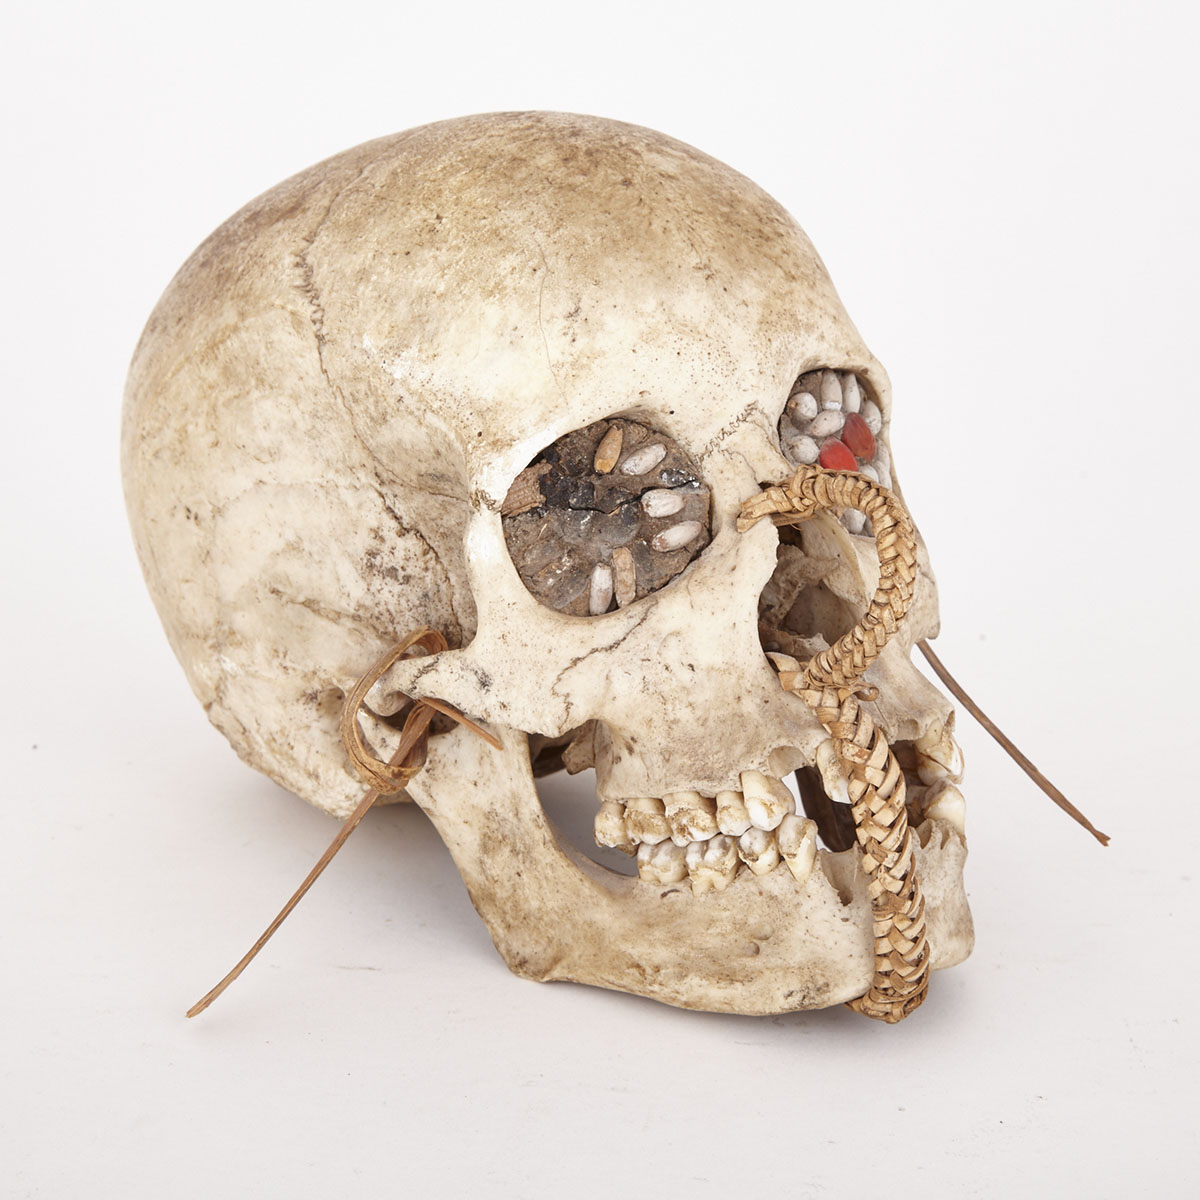 Asmat Ancestral Skull with woven cane decoration and seed inset eyes, Indonesia, West Papua, mid 20th century